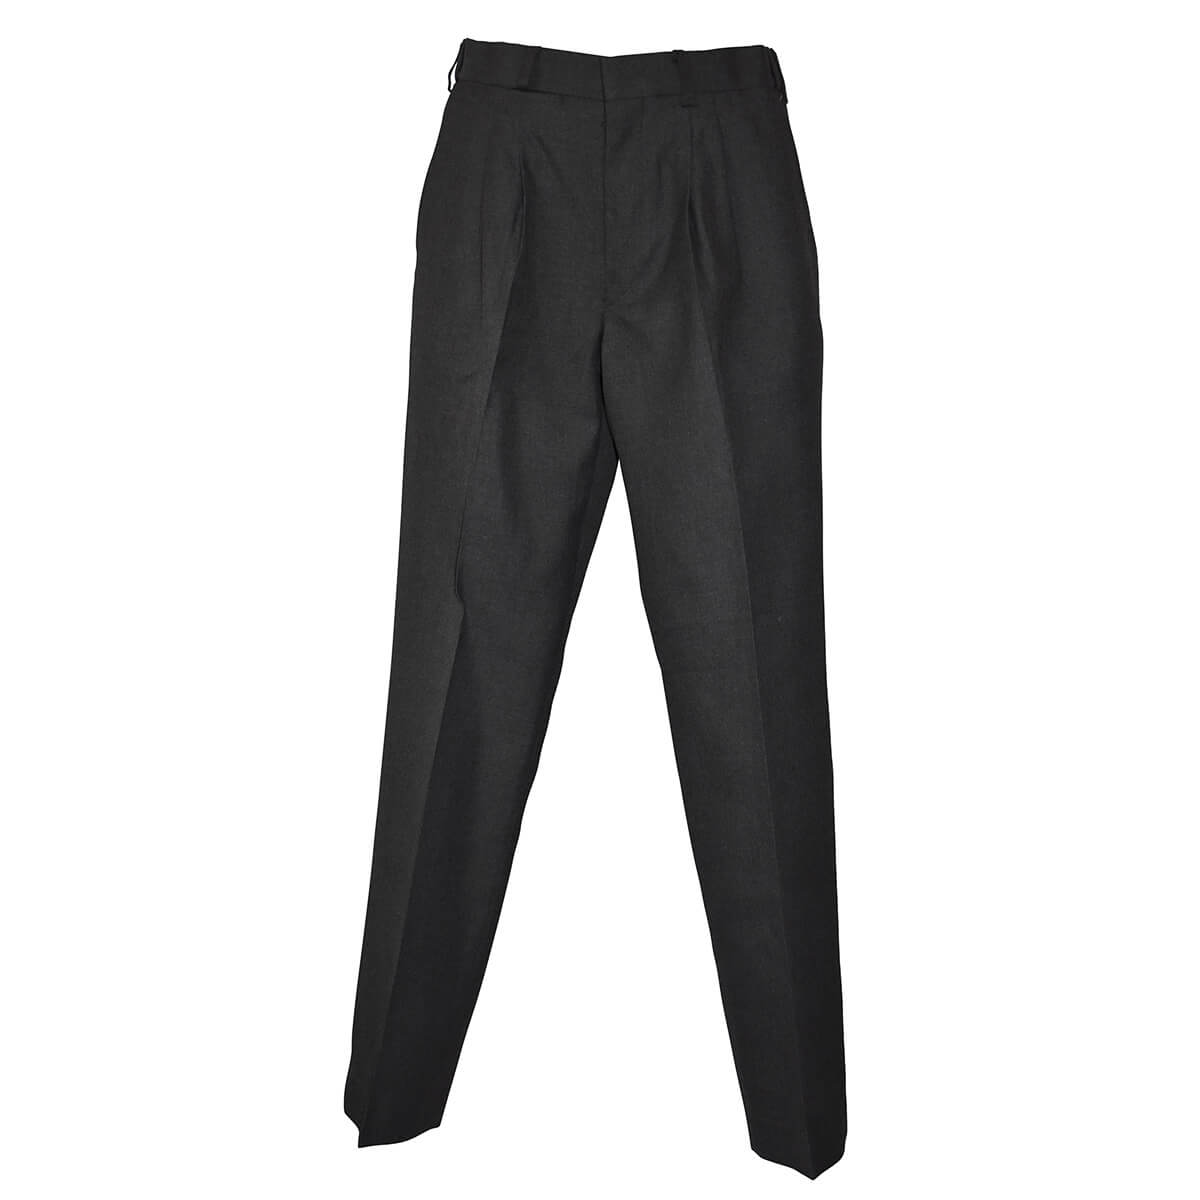 Mens Trouser Waist Extension Wyndham Central Secondary College Noone